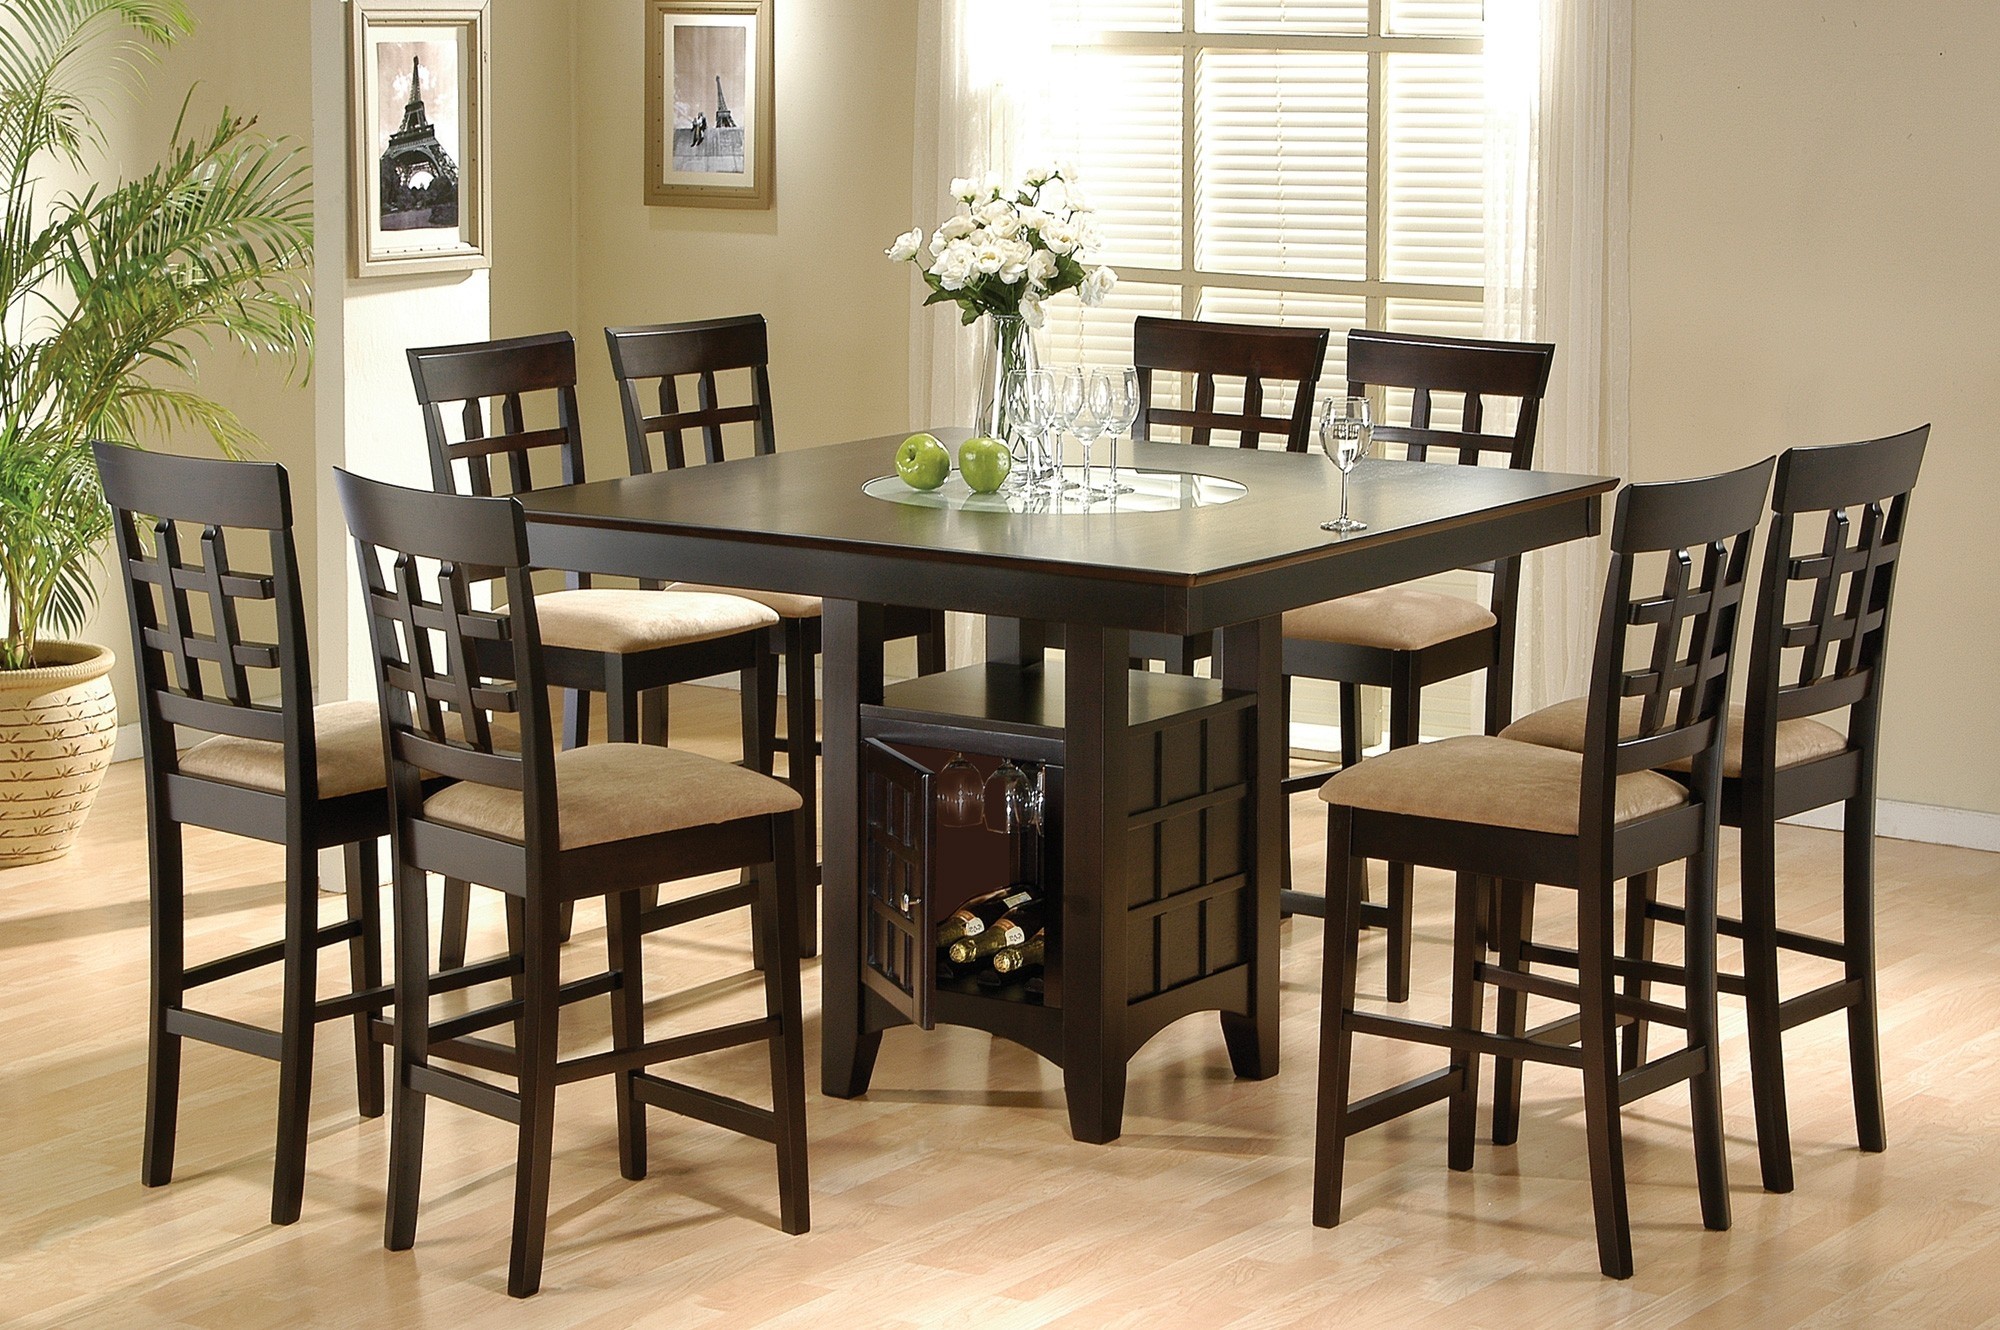 Dining table with storage